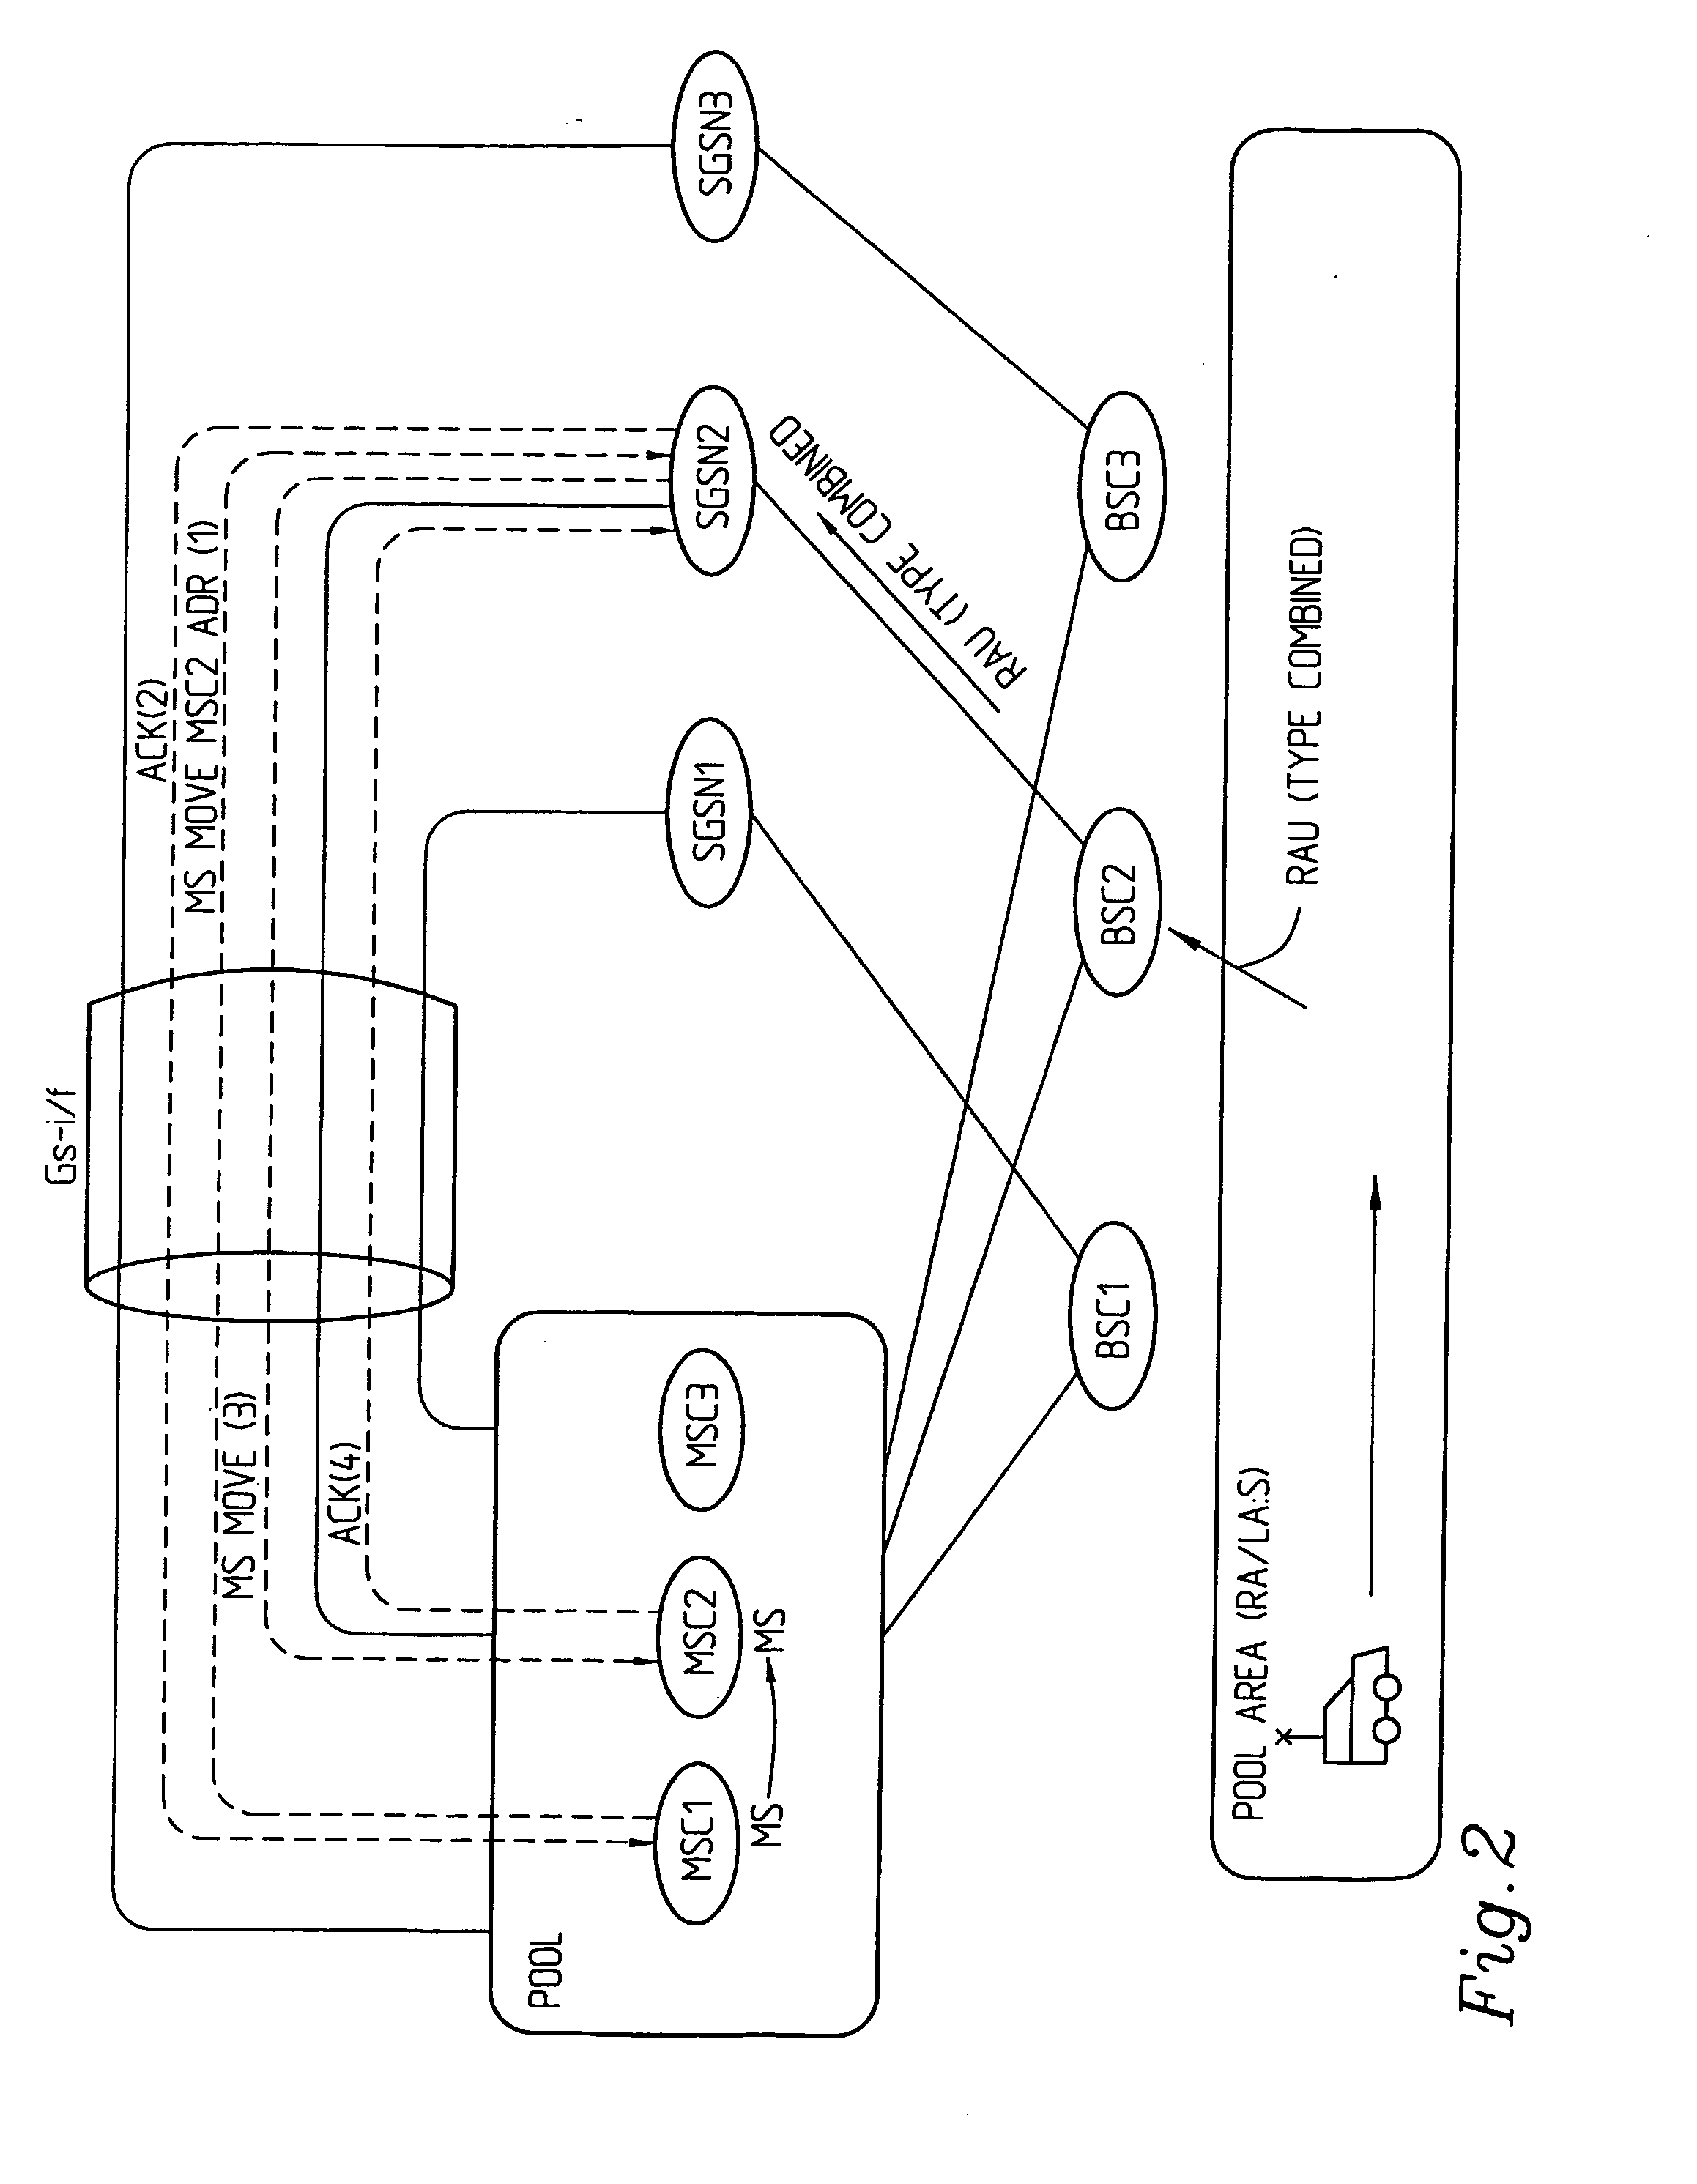 System and method relating to mobility in a mobile communication system